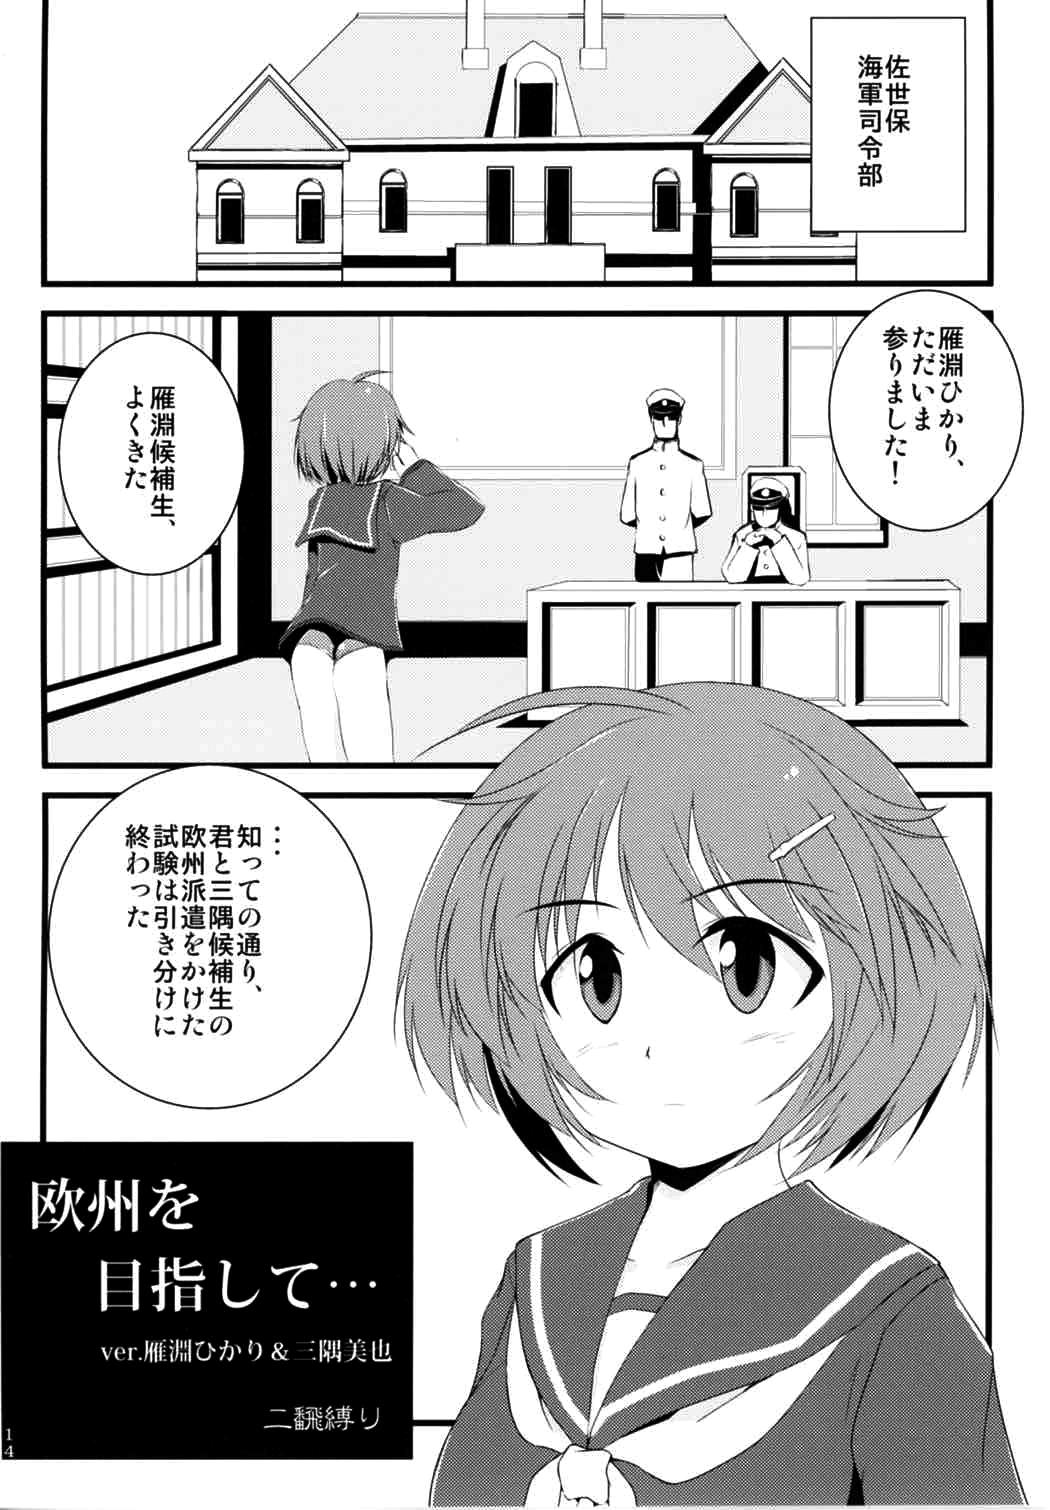 Buttfucking 502 Bad Gateway - Brave witches Reverse - Page 6